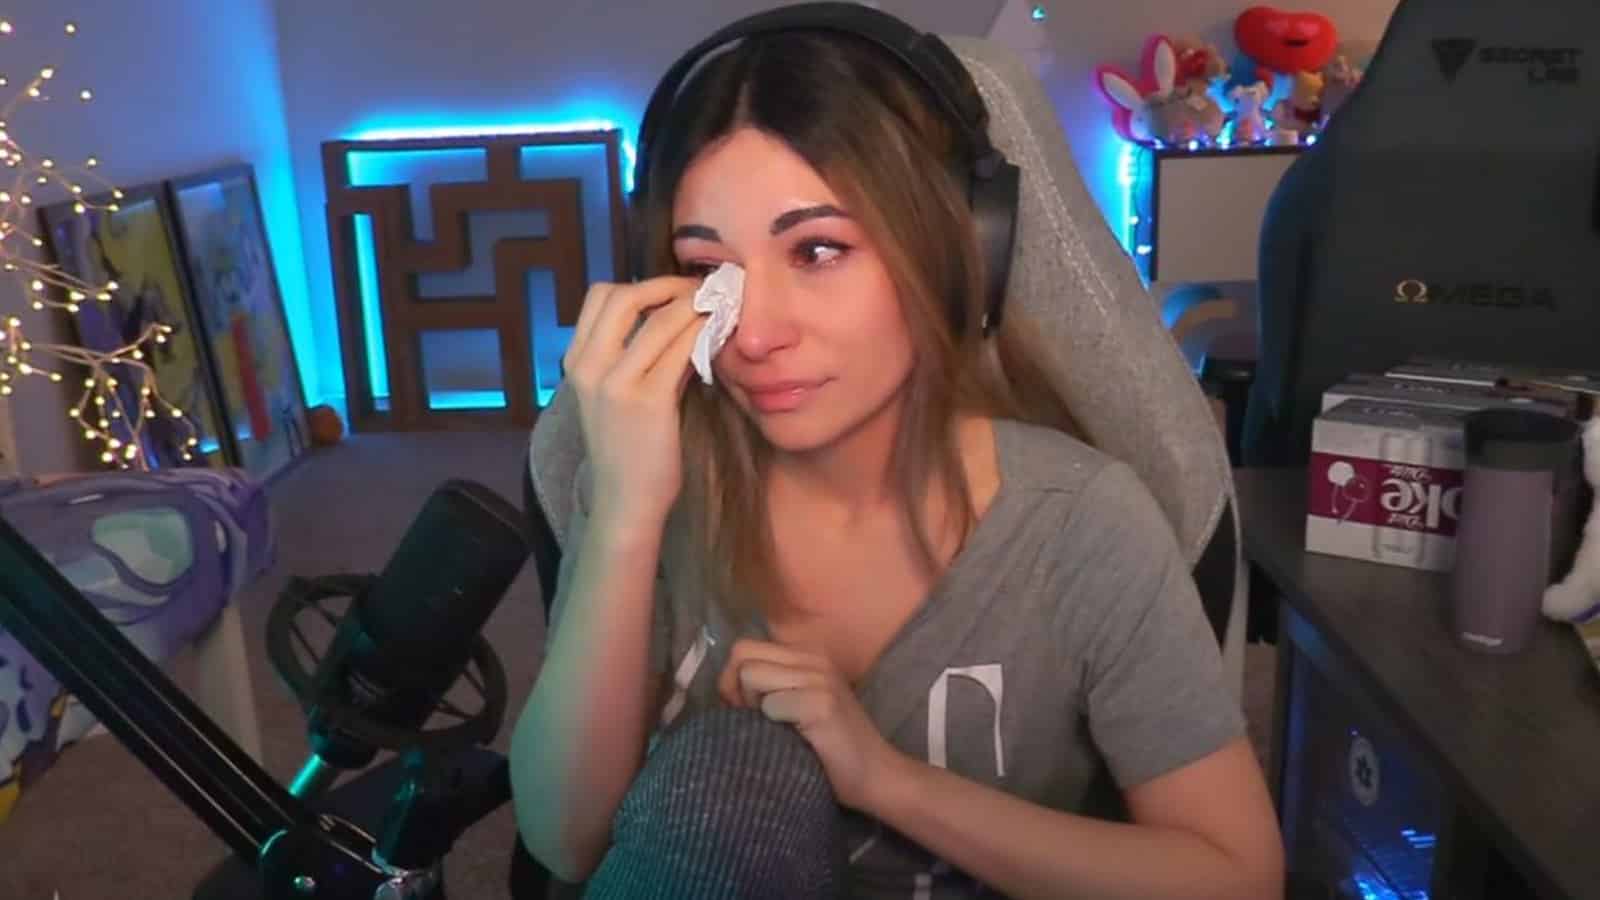 Alinity bursts into tears and apologizes after Twitch backlash for calling waiter "racist"